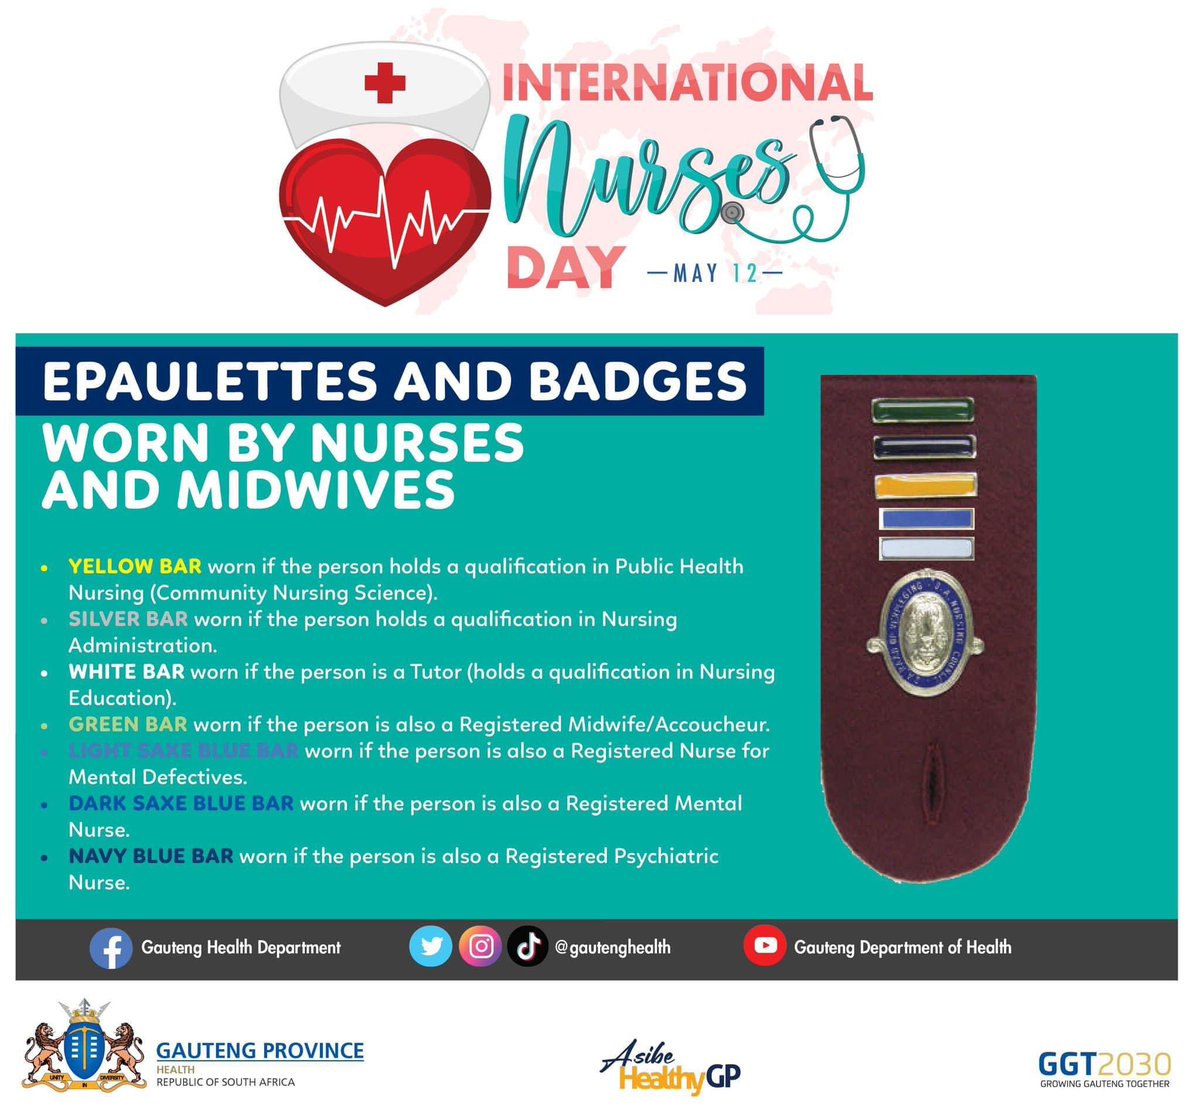 Know the epaulettes and badges worn by nurses and midwives #InternationalNursesDay #OurNursesOurFuture #AsibehealthyGP